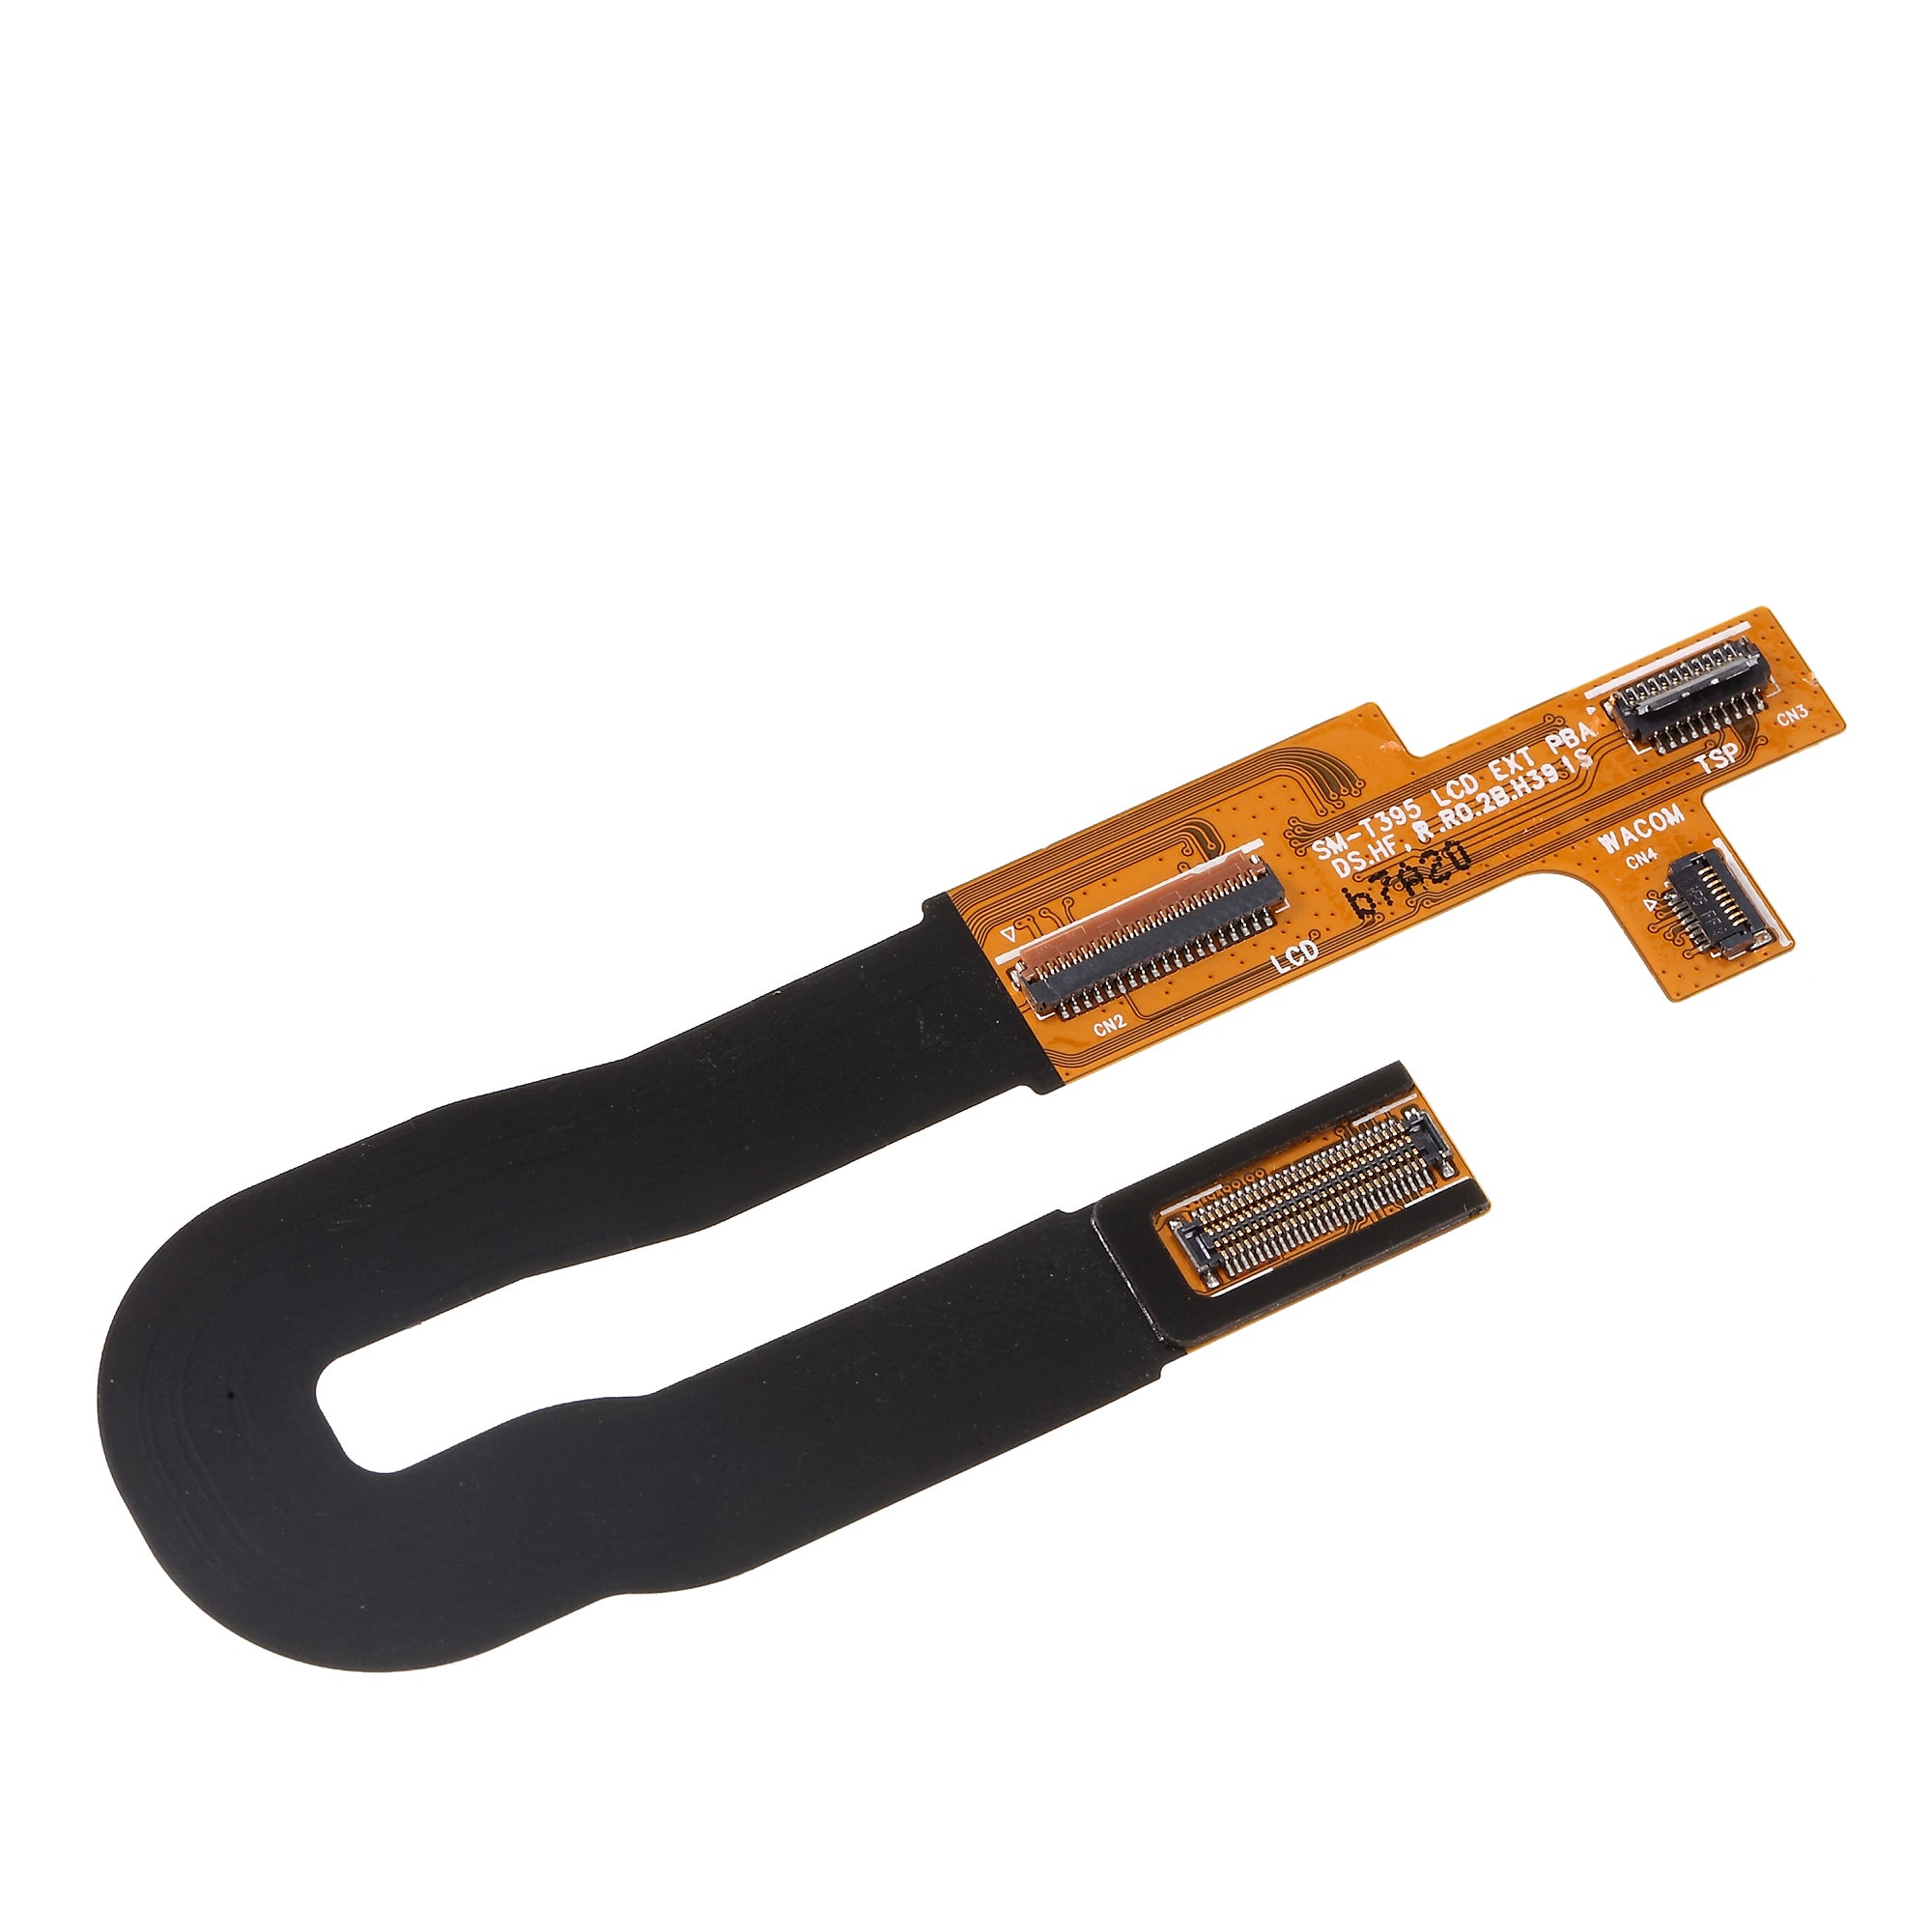 OEM Motherboard Flex Cable Part for Samsung Galaxy Tab Active 2 8.0 T395 (4G Version)